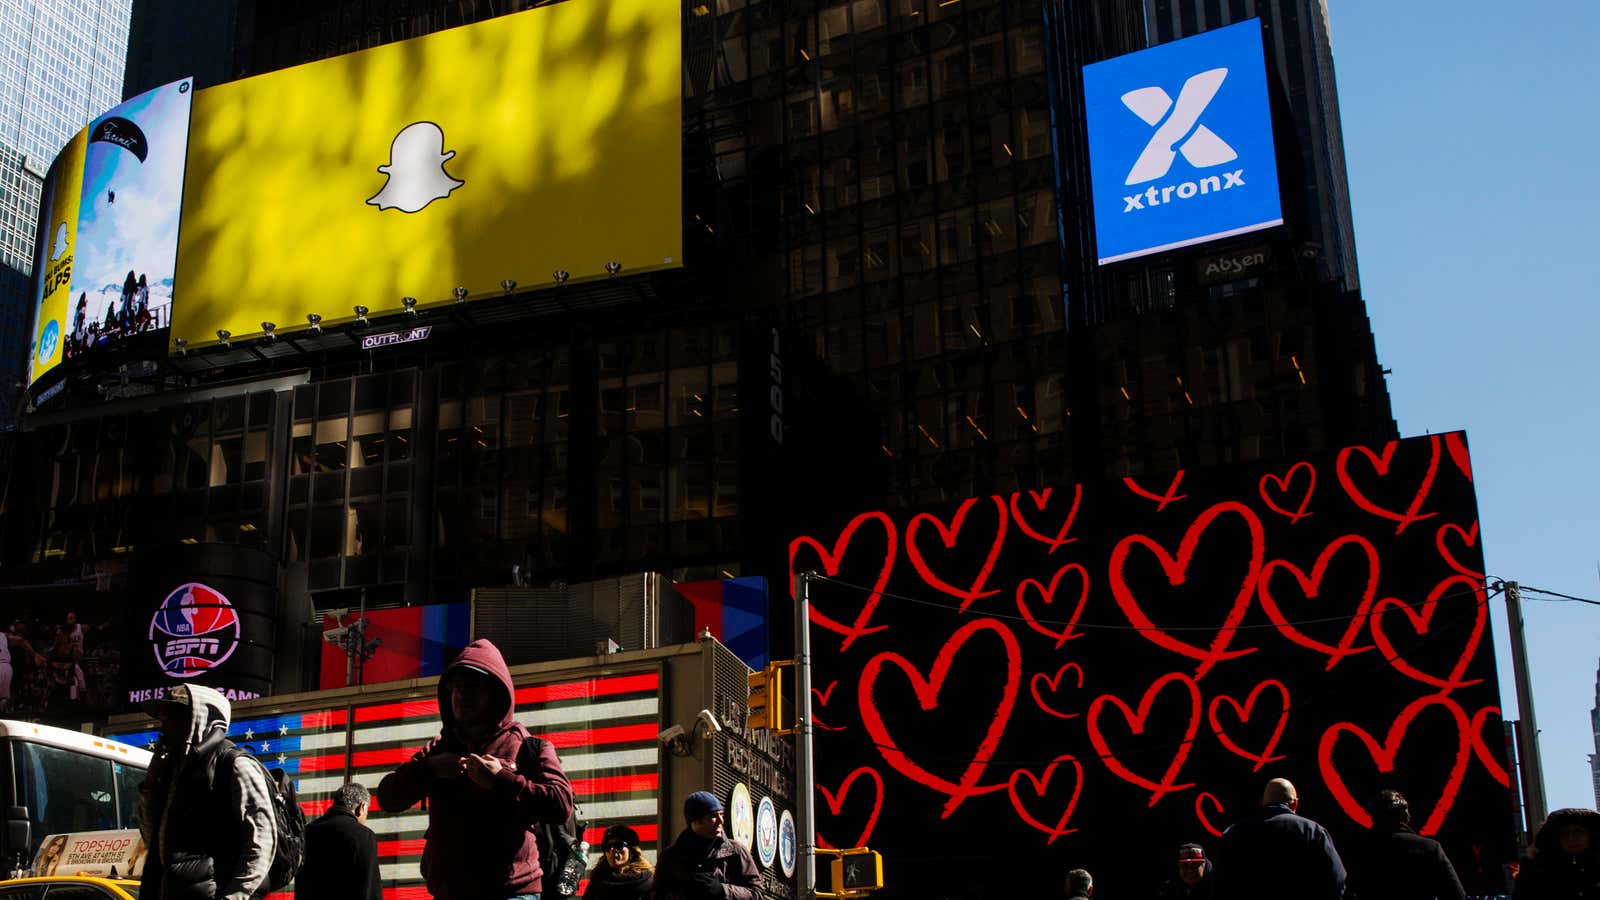 Snapchat’s newest feature is focused on storing your old pics and videos, not deleting them.